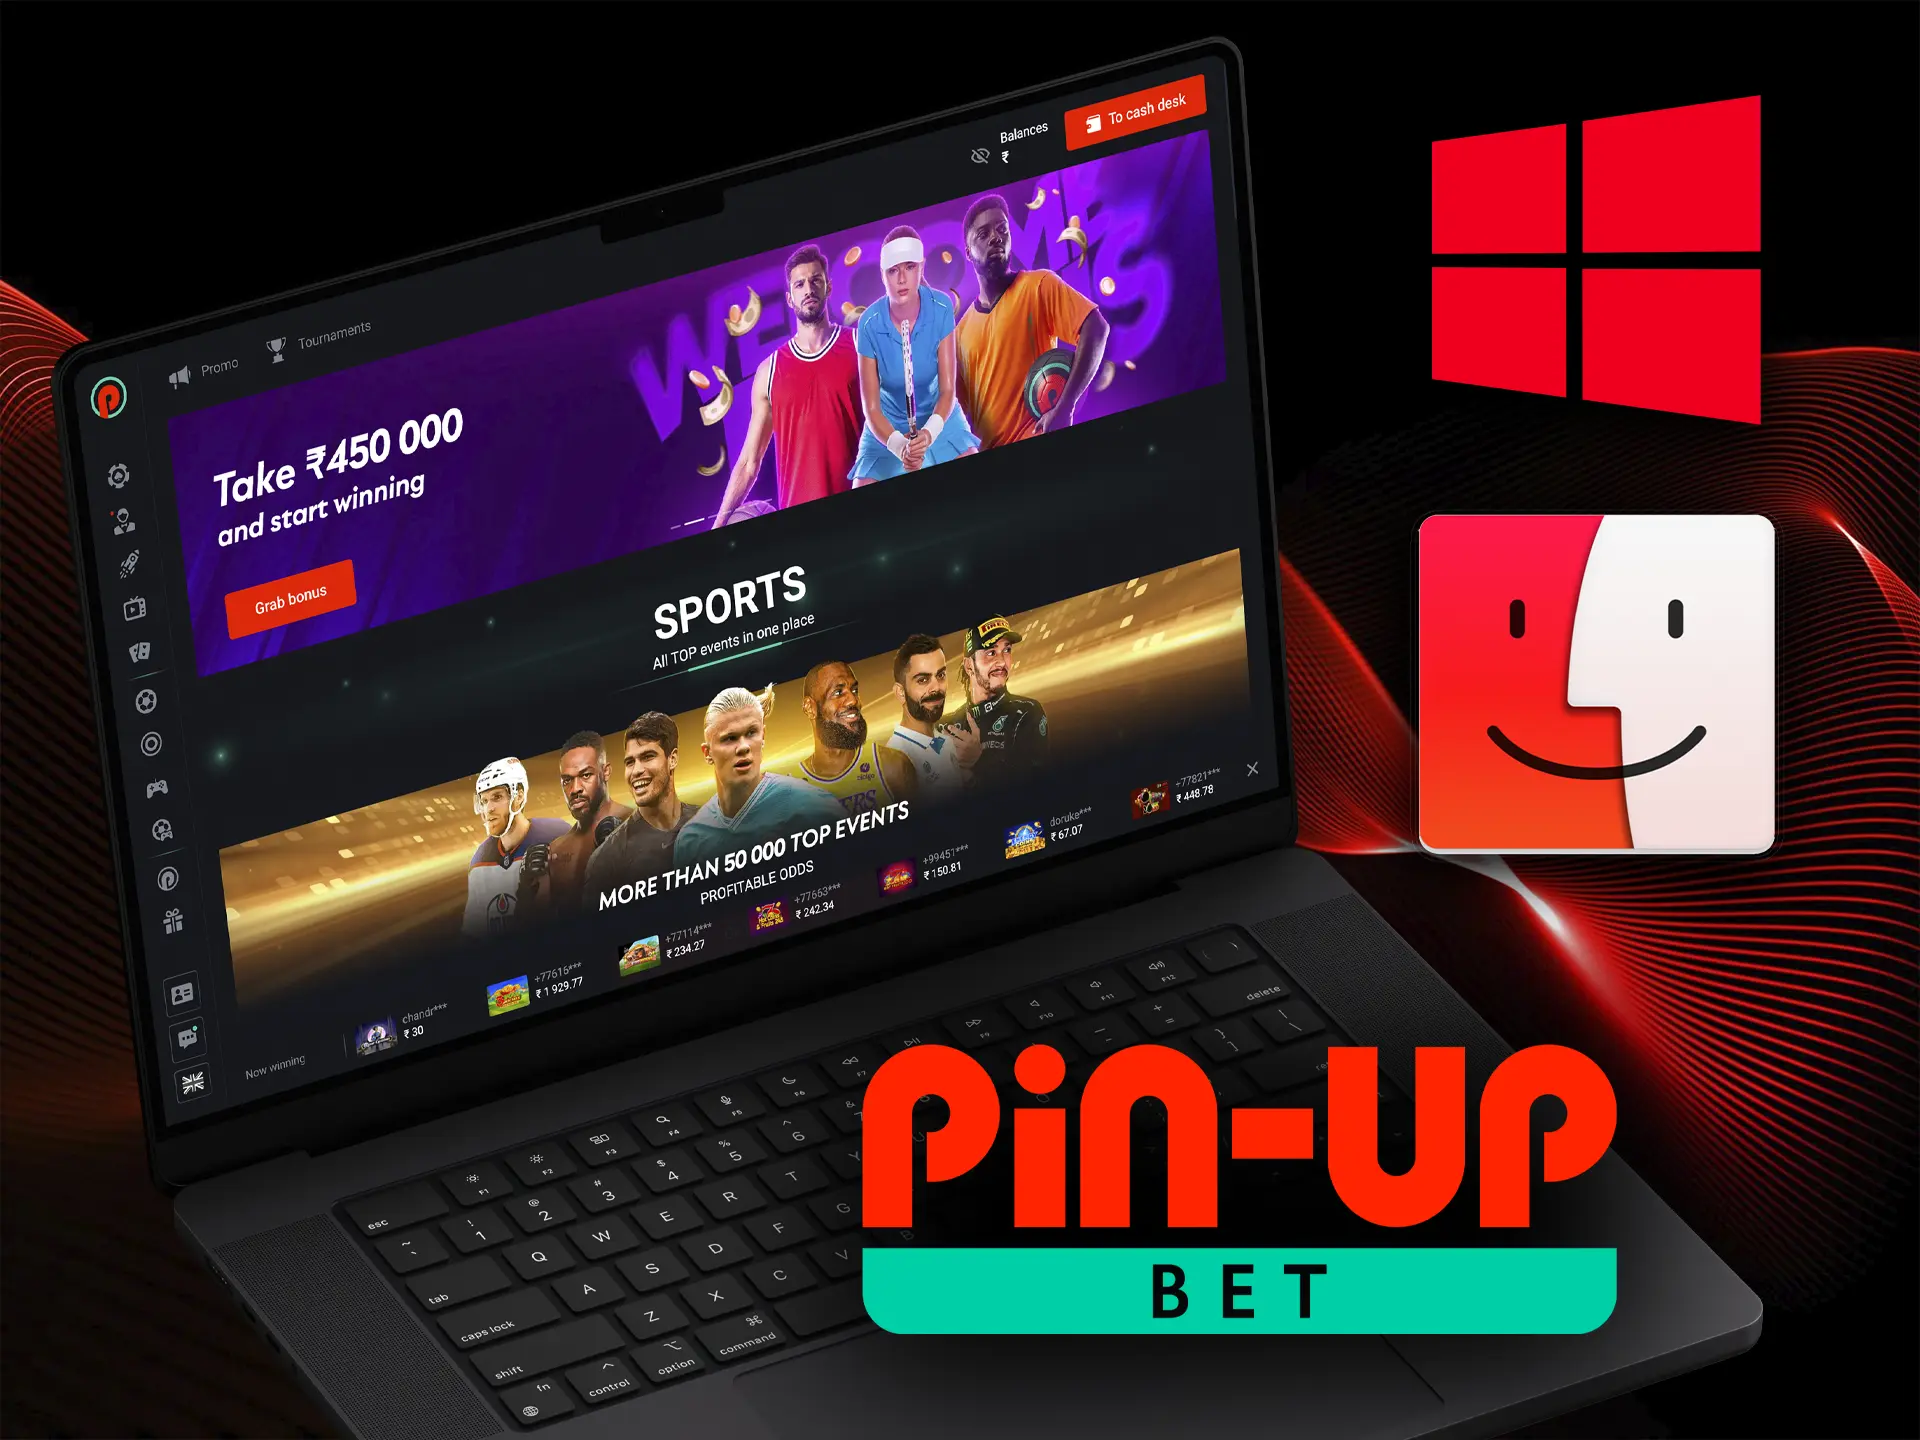 Install the Pin Up application on your PC or laptop.